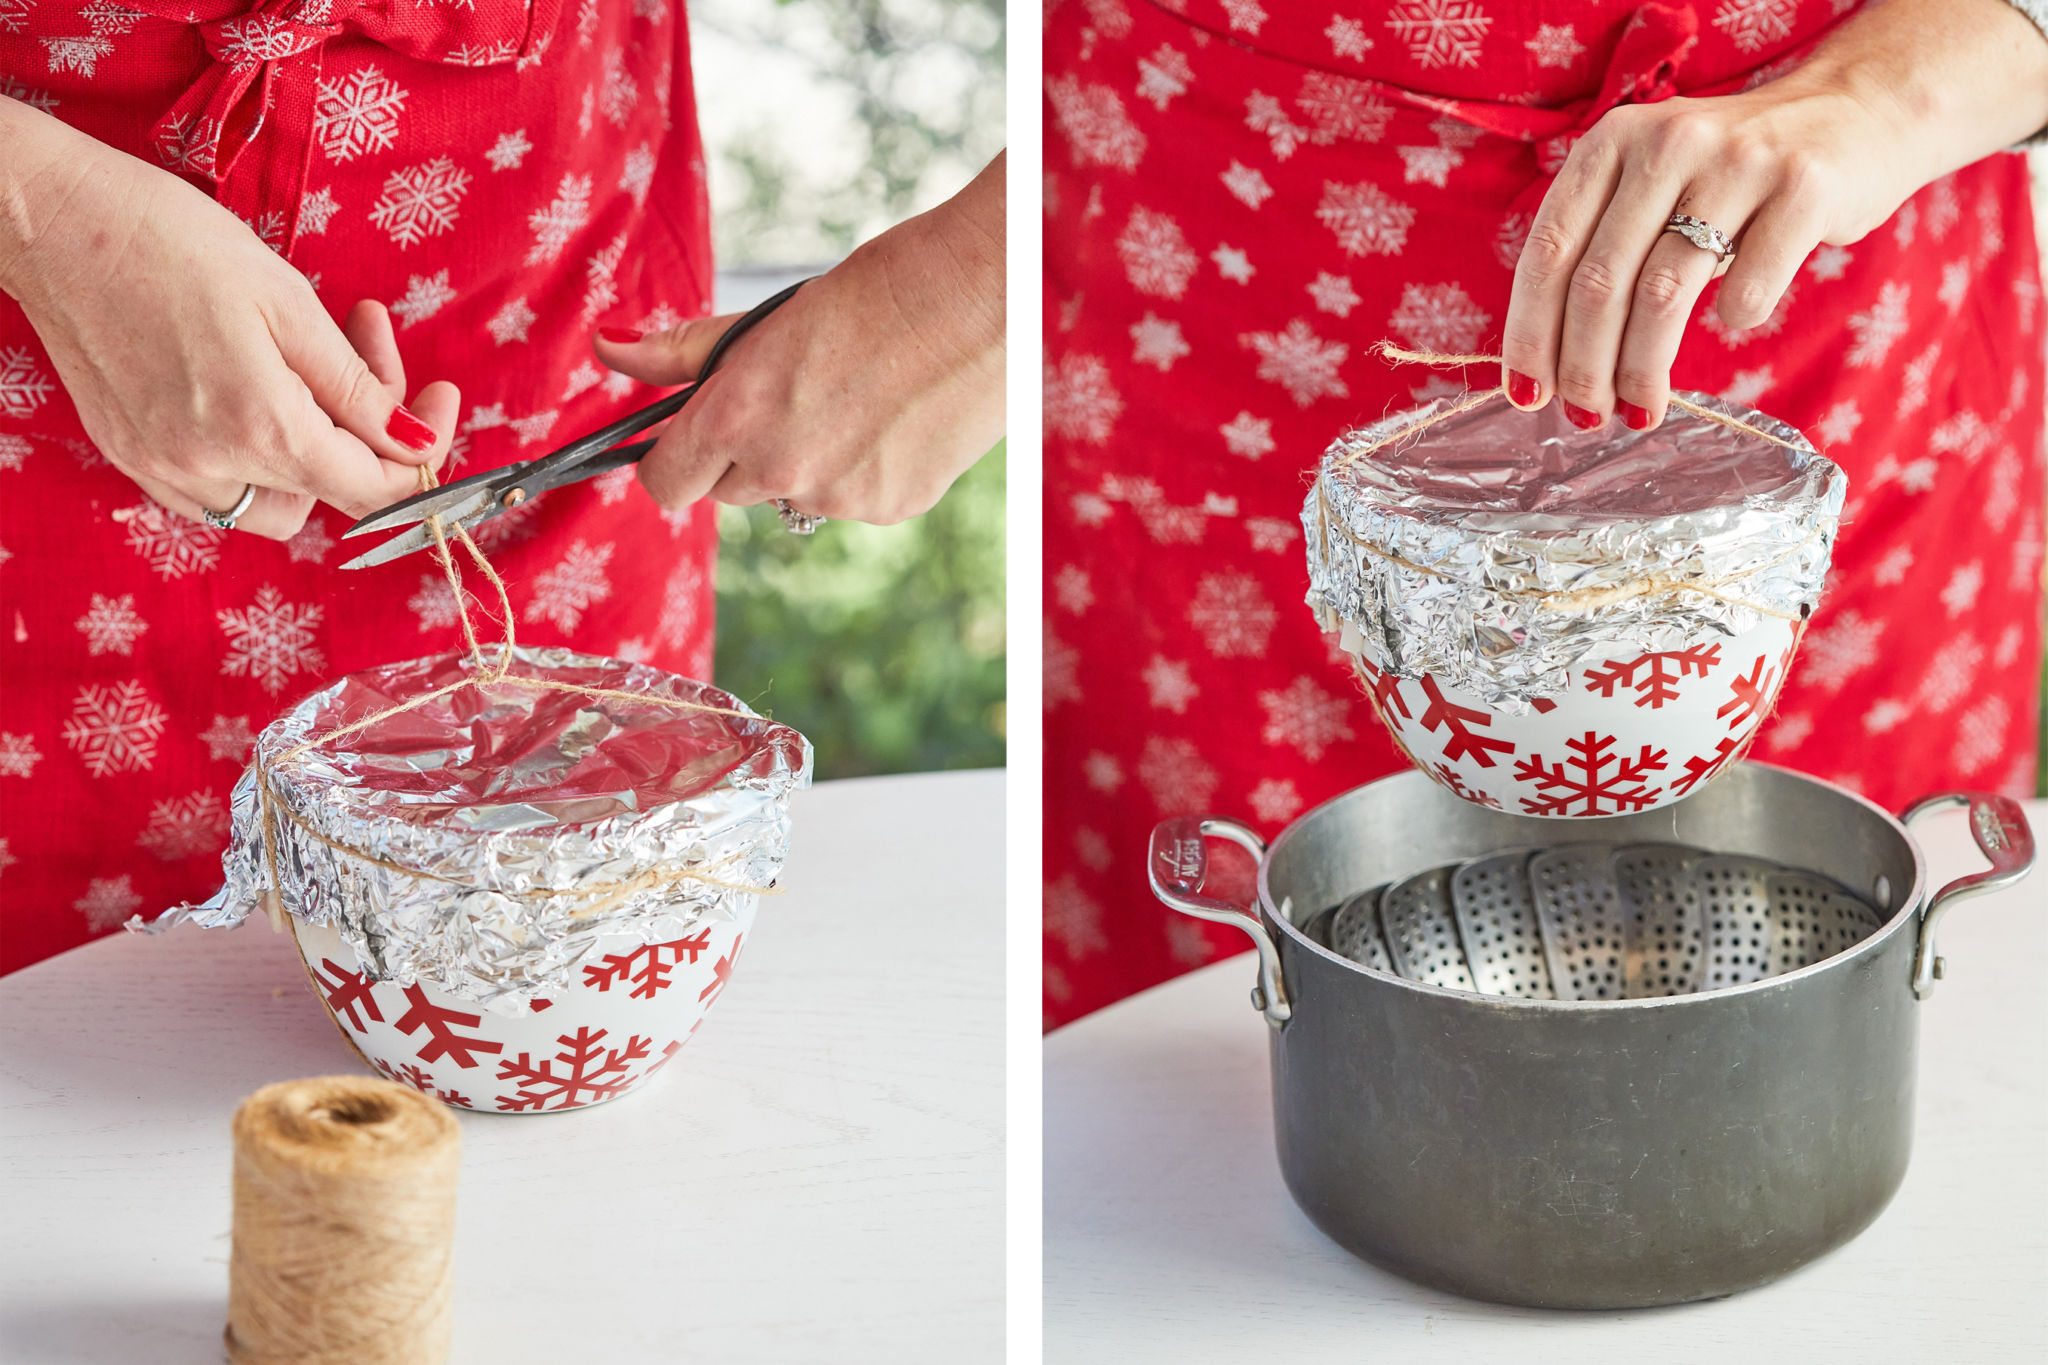 A side-by-side of covering the Christmas pudding and lowering it into the pot.